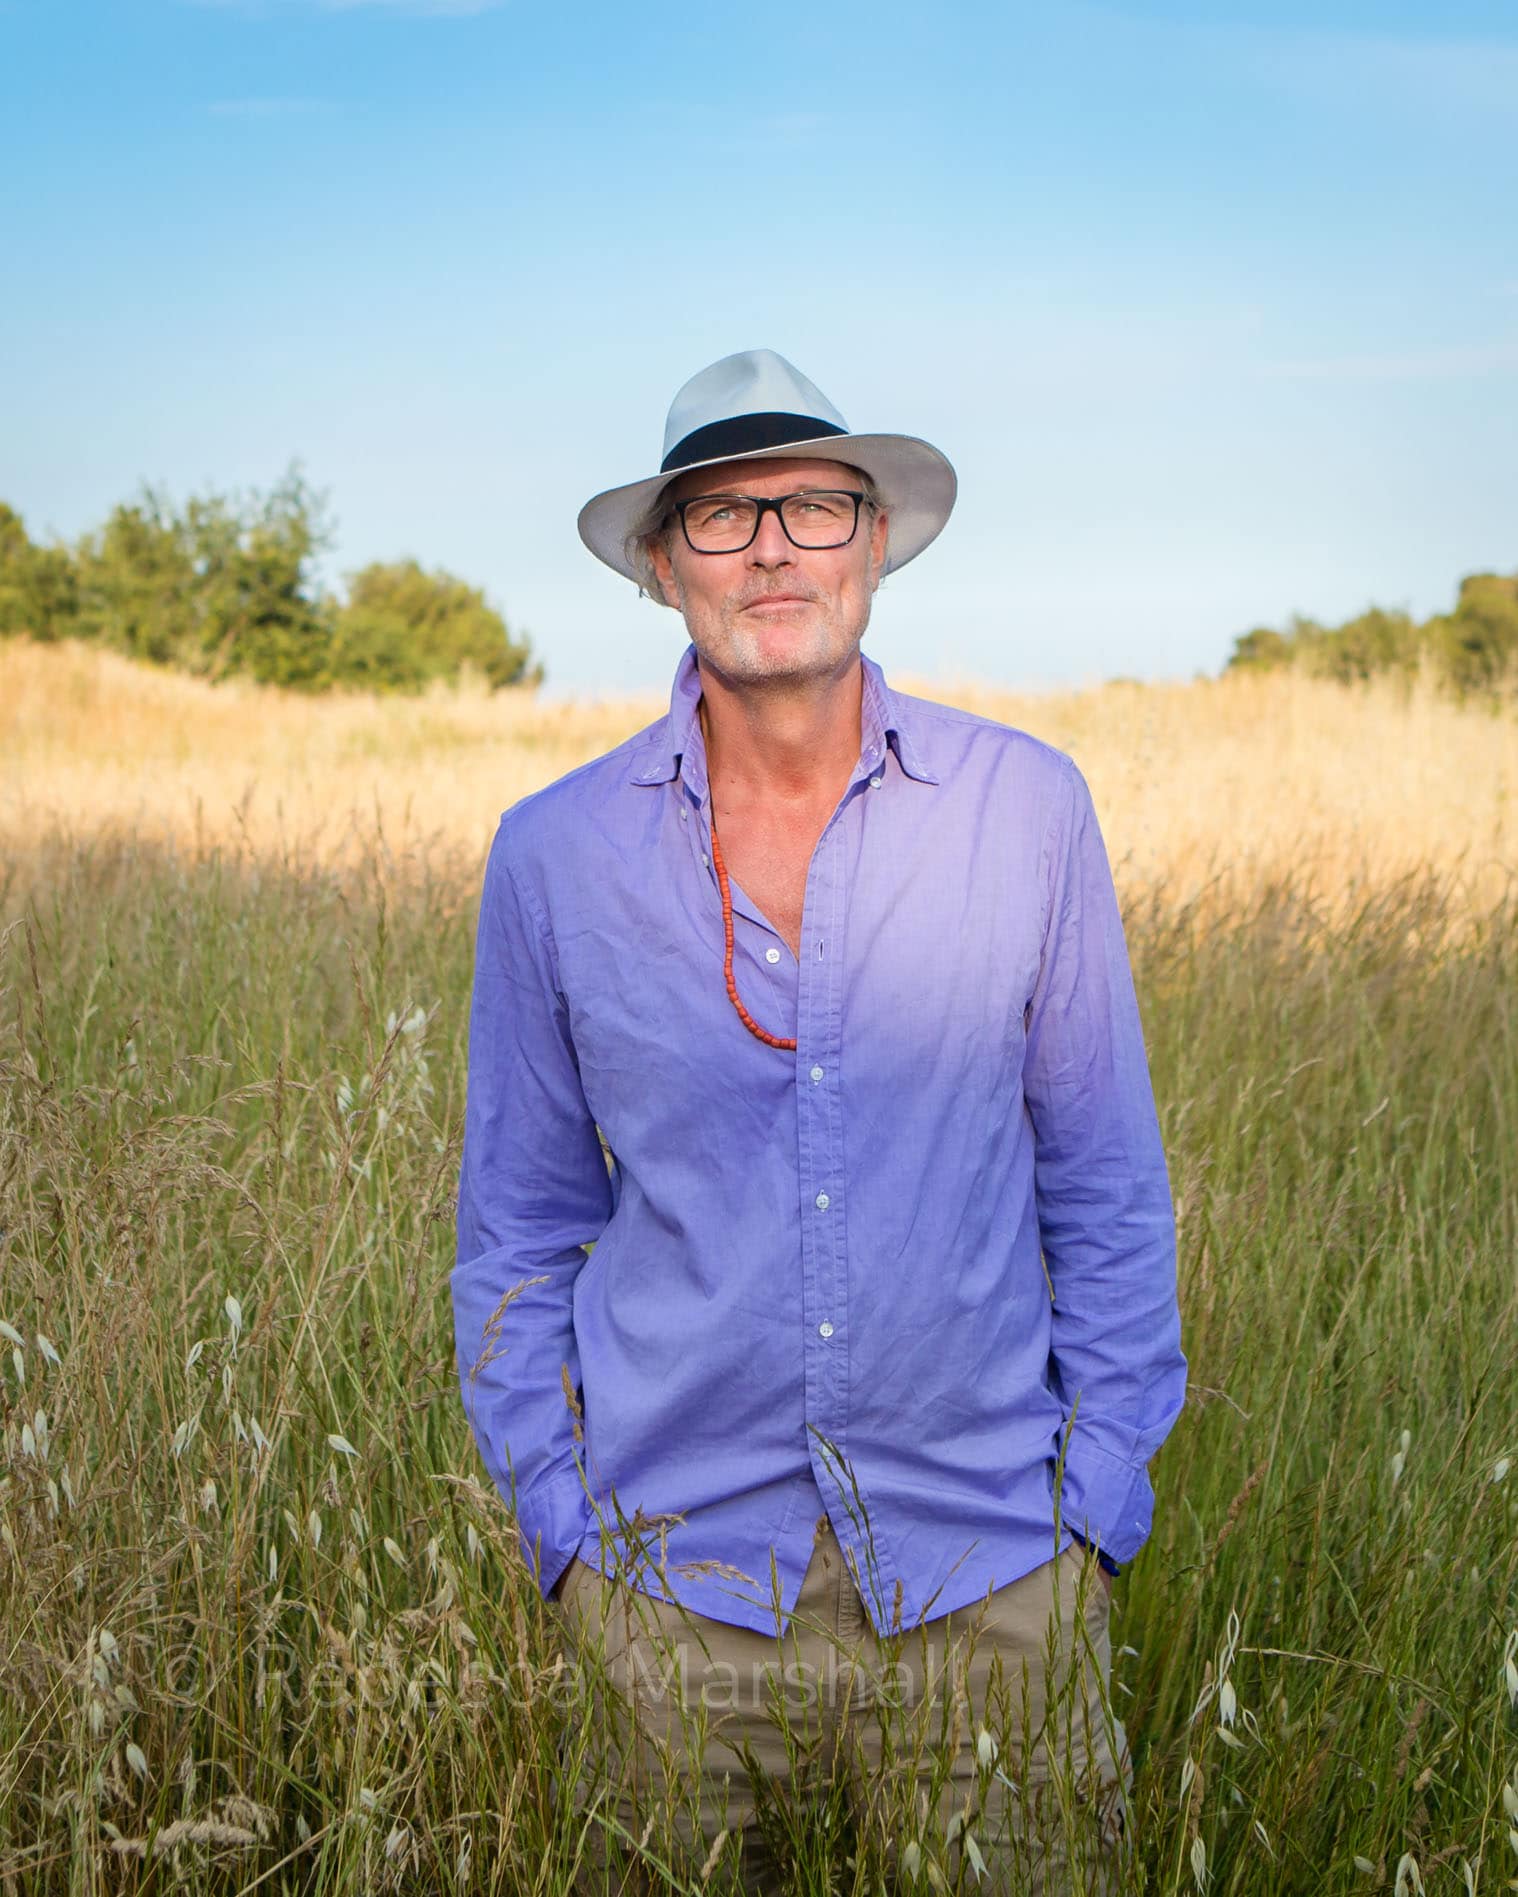 Photographic portrait of a man standing in a cornfield in a white hat and purple shirt